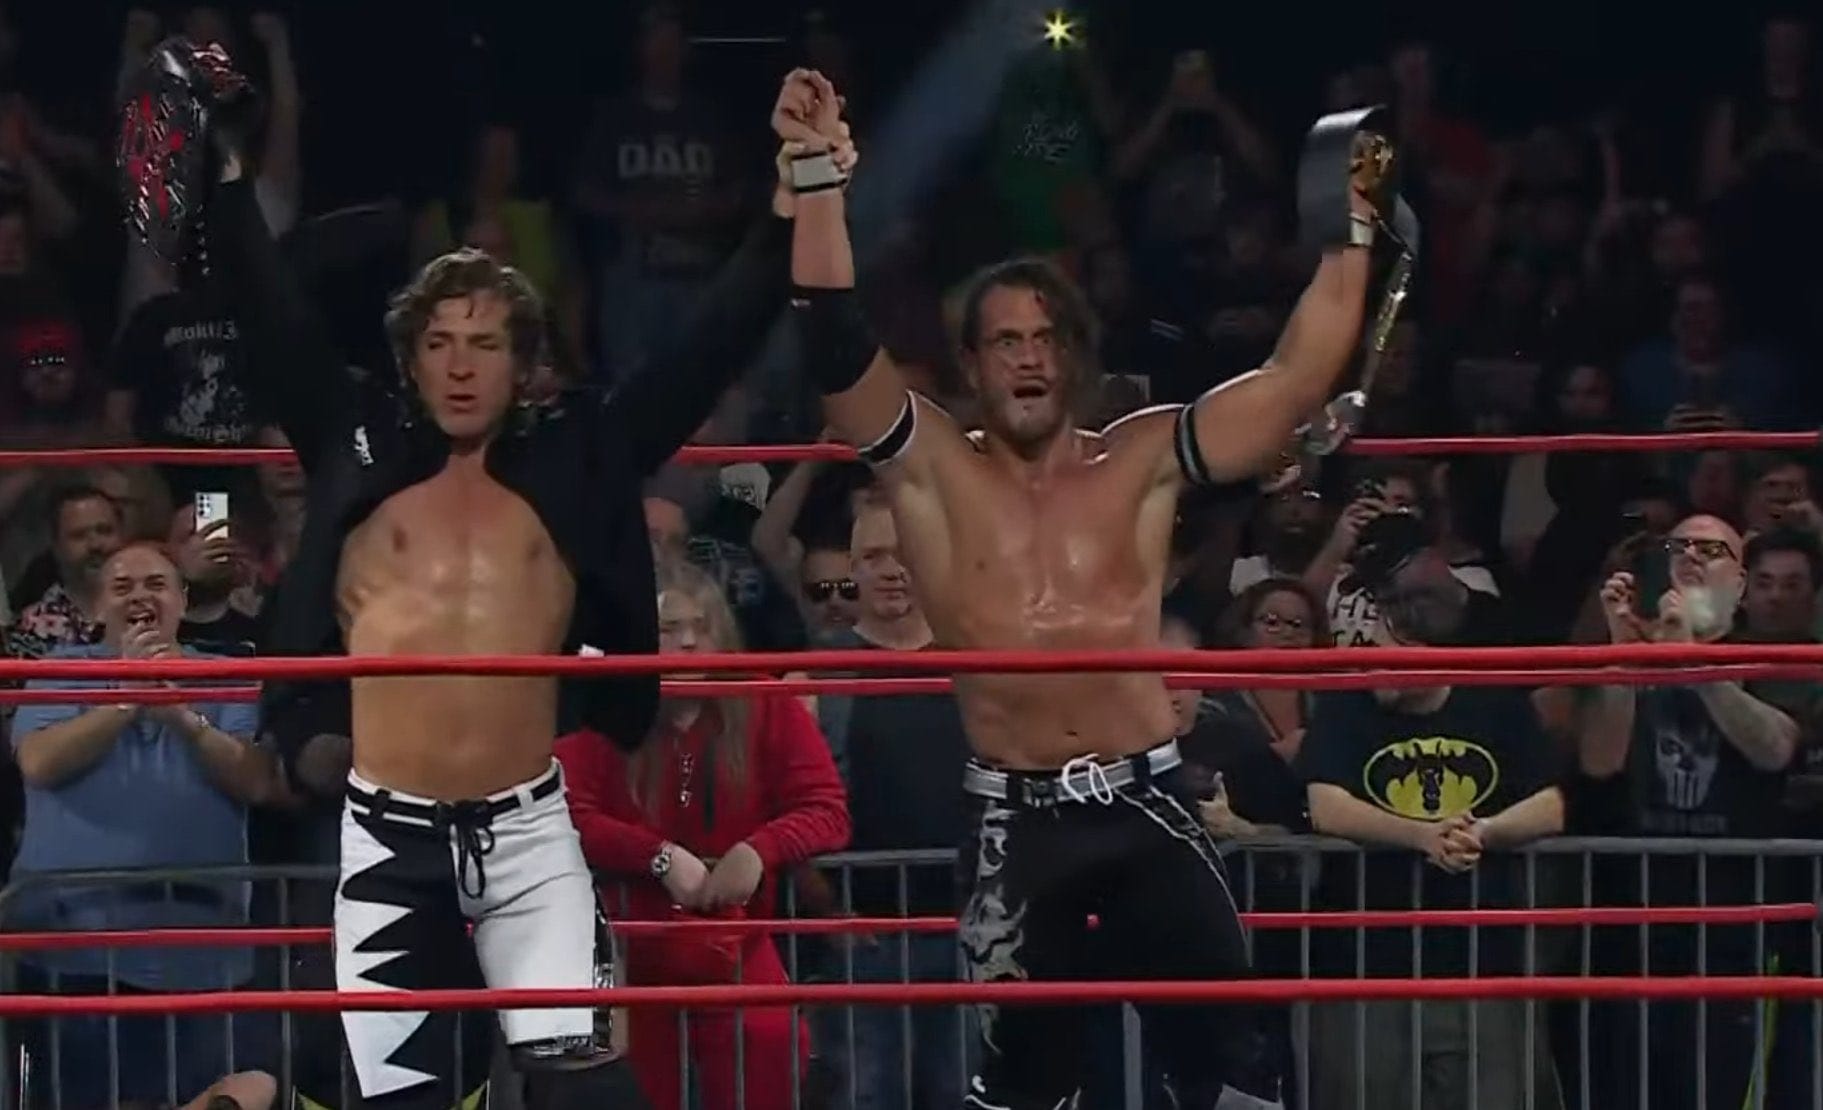 Alex Shelley wins IMPACT Wrestling World Championship Against All Odds 2023